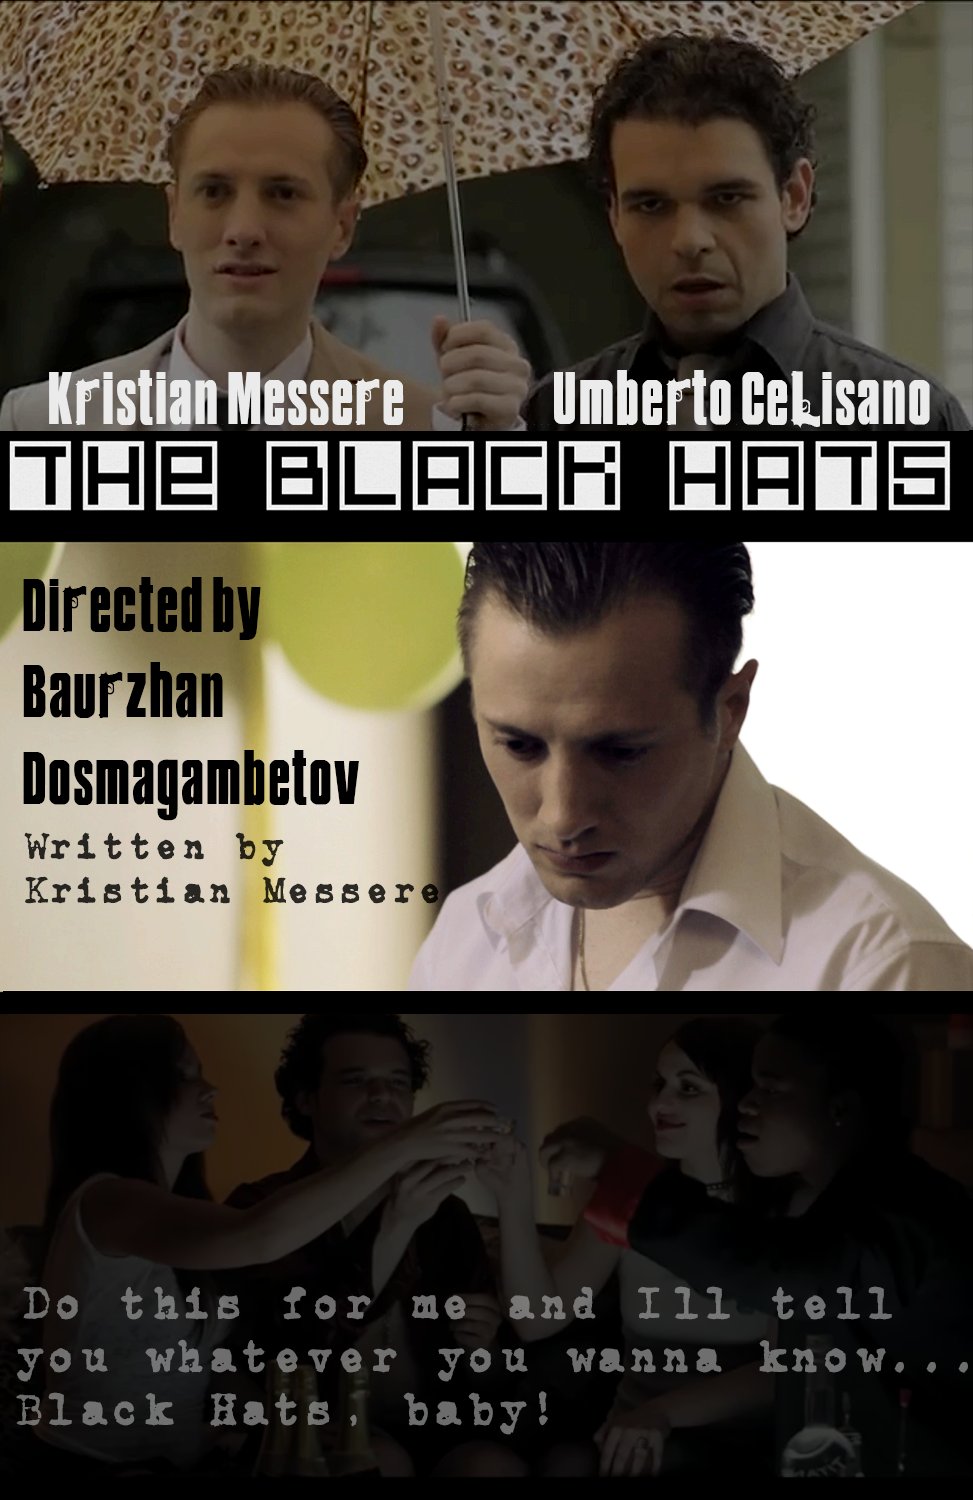 The Black Hats Directed by Baurzhan Dosmagambetov Written by/ Starring Kristian Messere